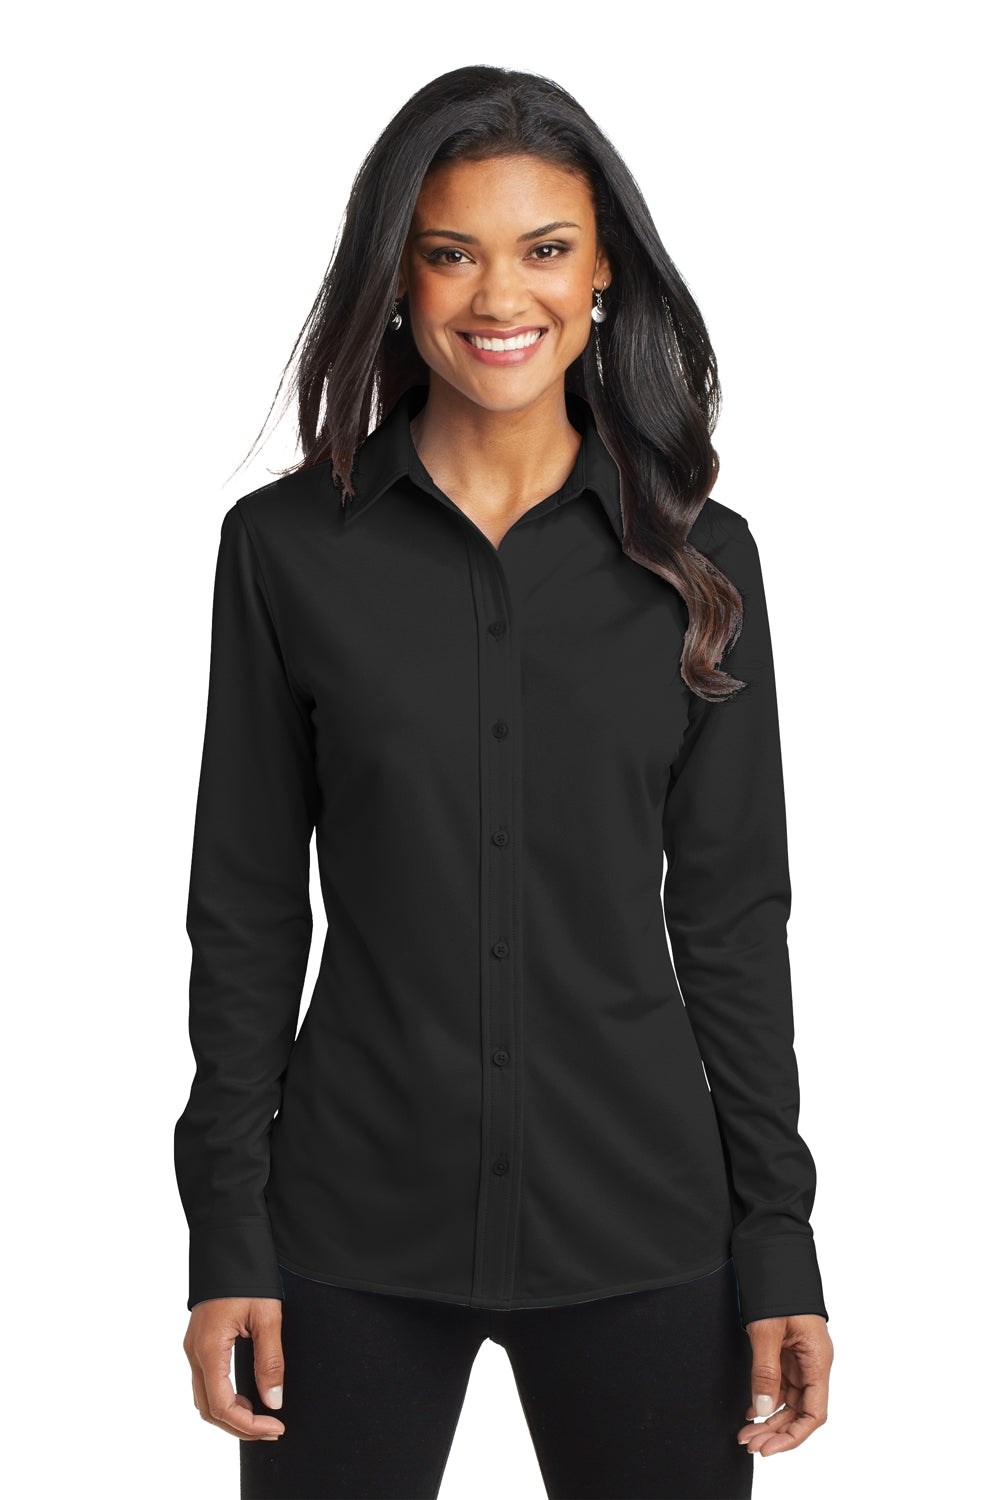 Port Authority L570 Womens Dimension Moisture Wicking Long Sleeve Button Down Shirt Black Front